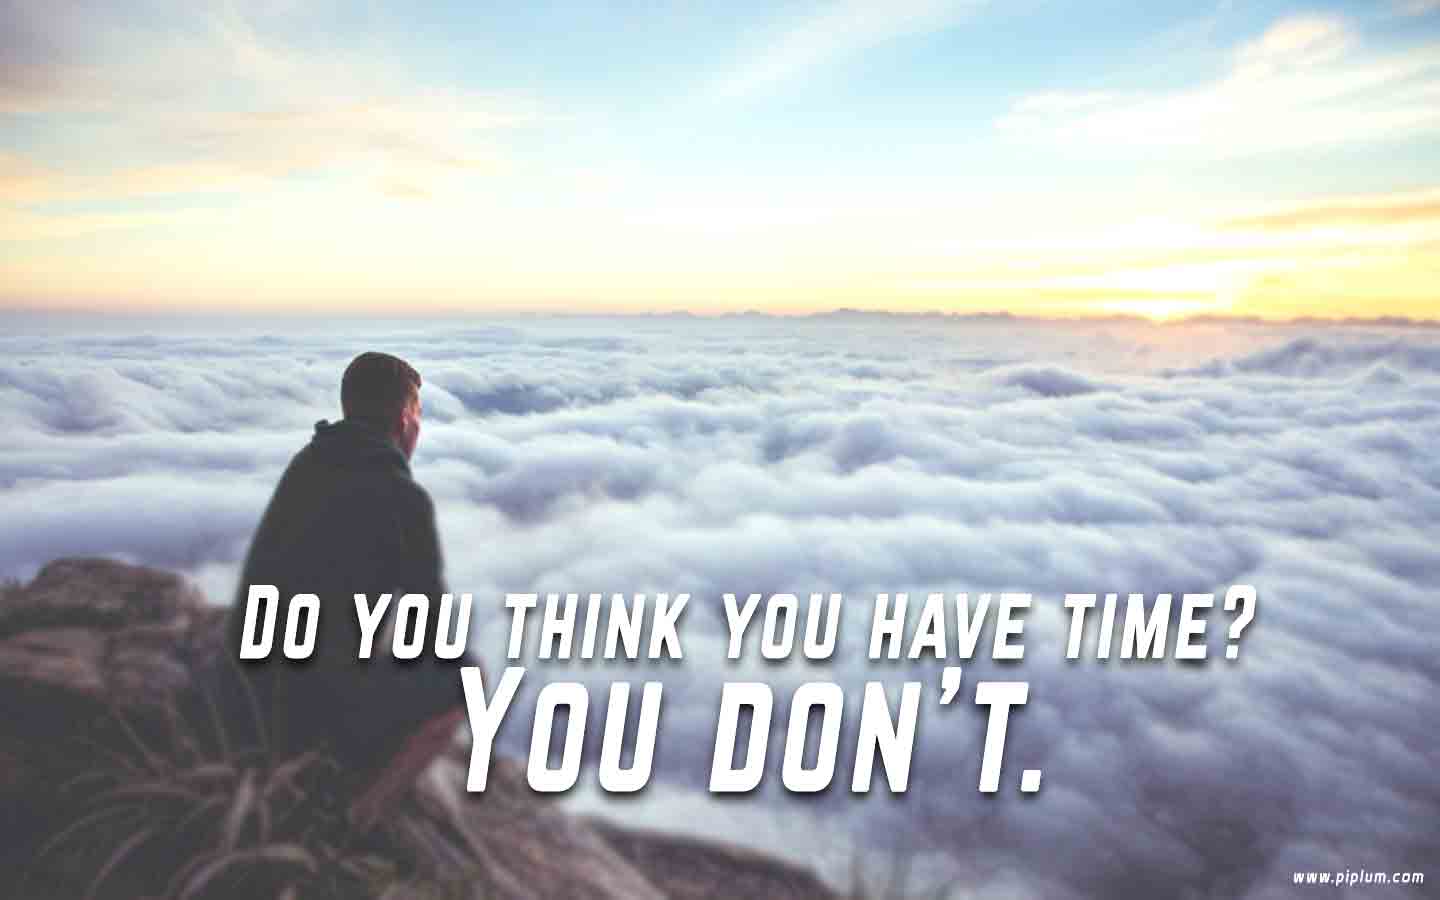 Do-you-think-you-have-time.-You-do-not-have.-Inspirational-Time-quote